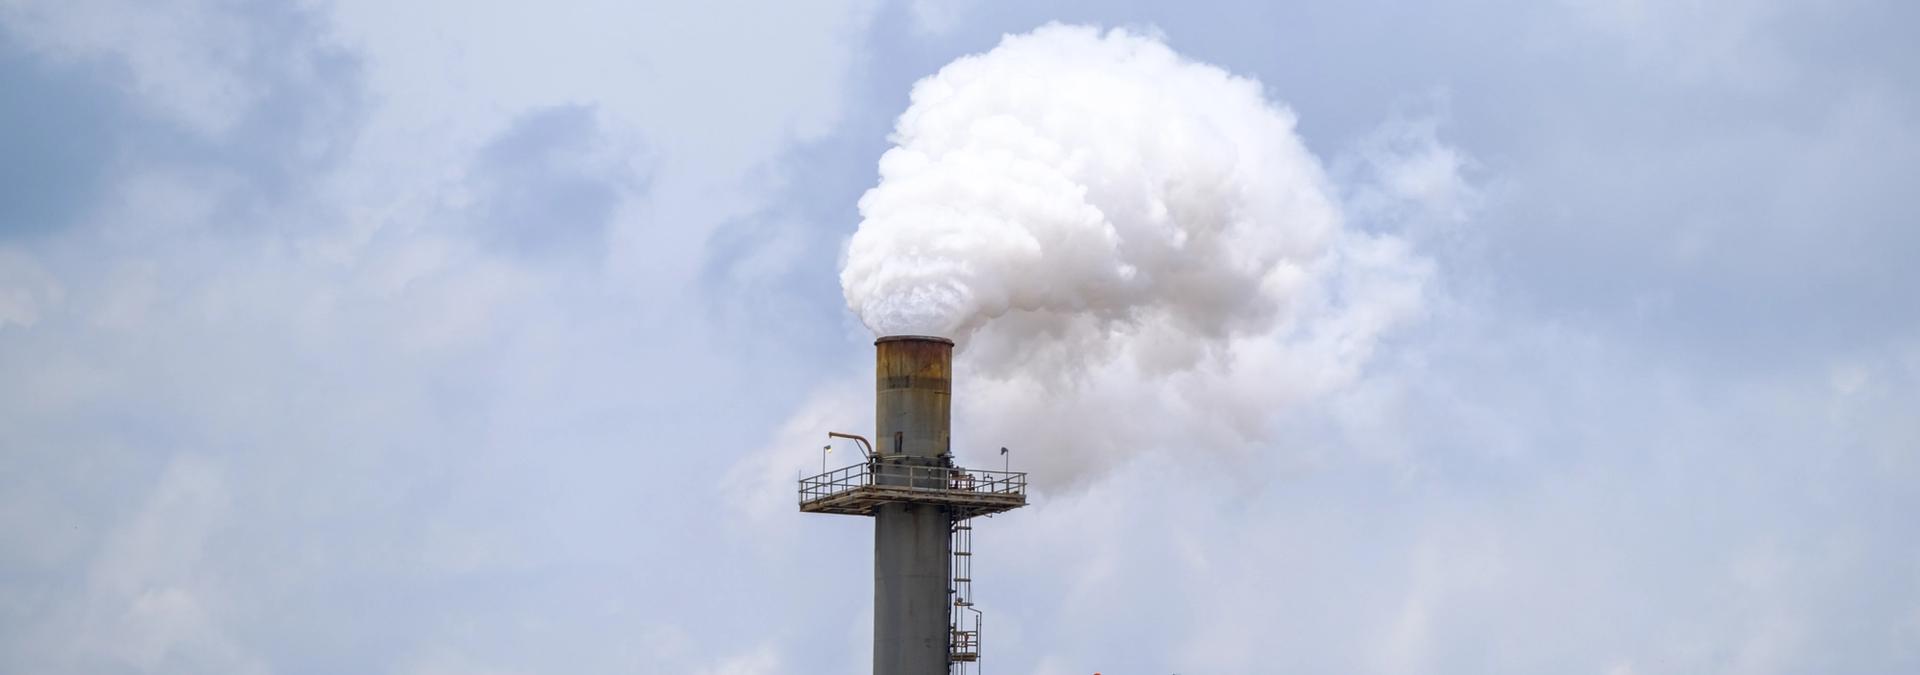 Illegal air pollution, researchers at Indiana University estimated, causes at least 42 deaths and more than $240 million in economic damages in Texas every single year. Courtesy photo.